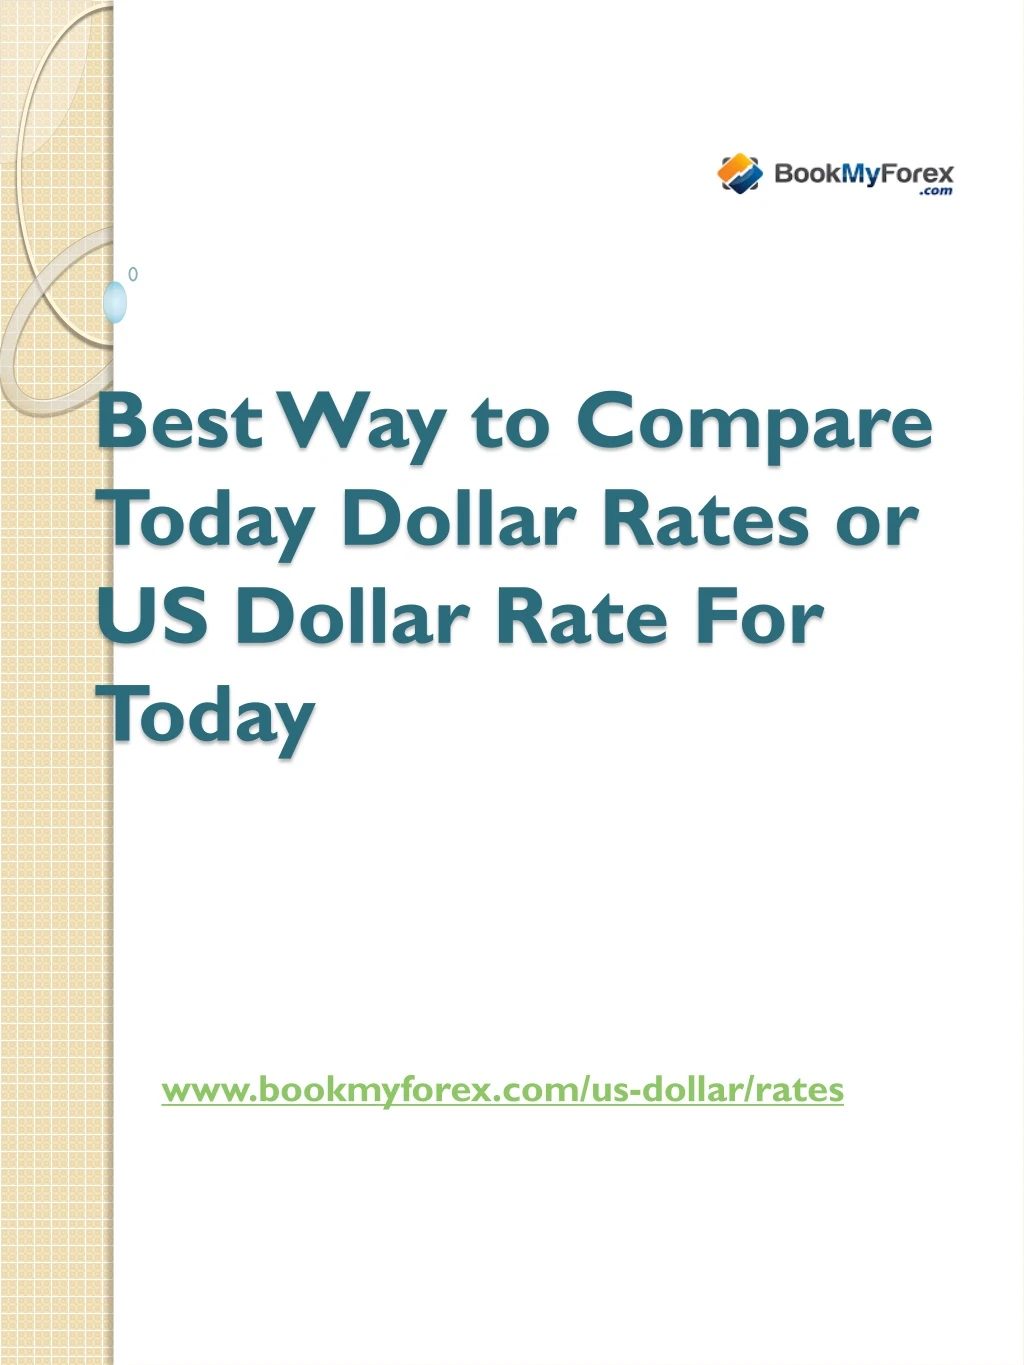 best way to compare today dollar rates or us dollar rate f or today